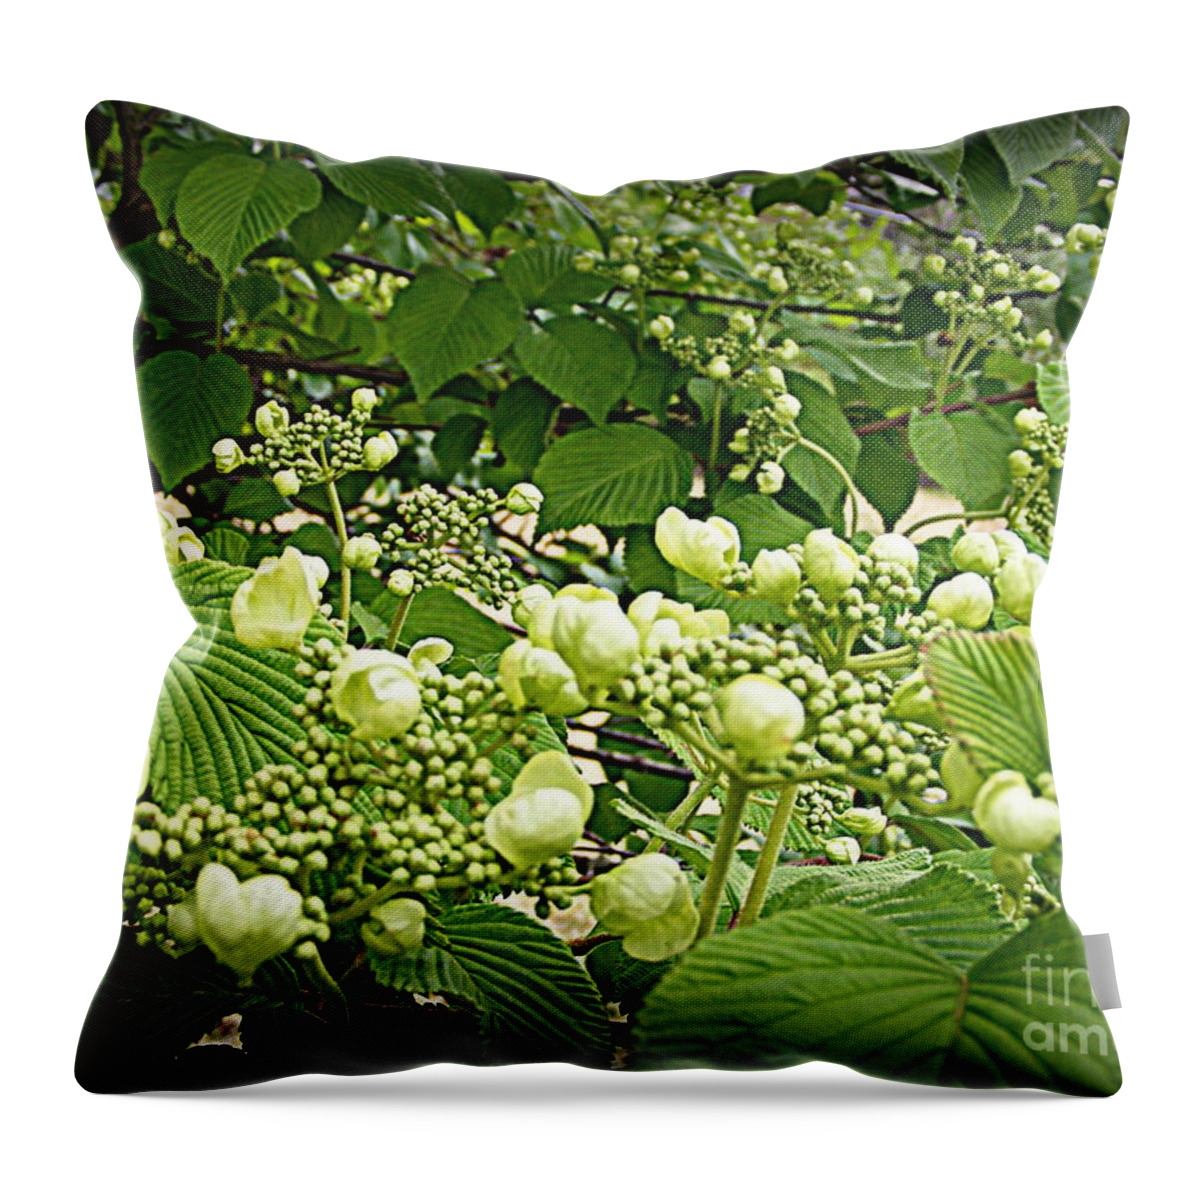 Photography Throw Pillow featuring the photograph The Prequel by Nancy Kane Chapman